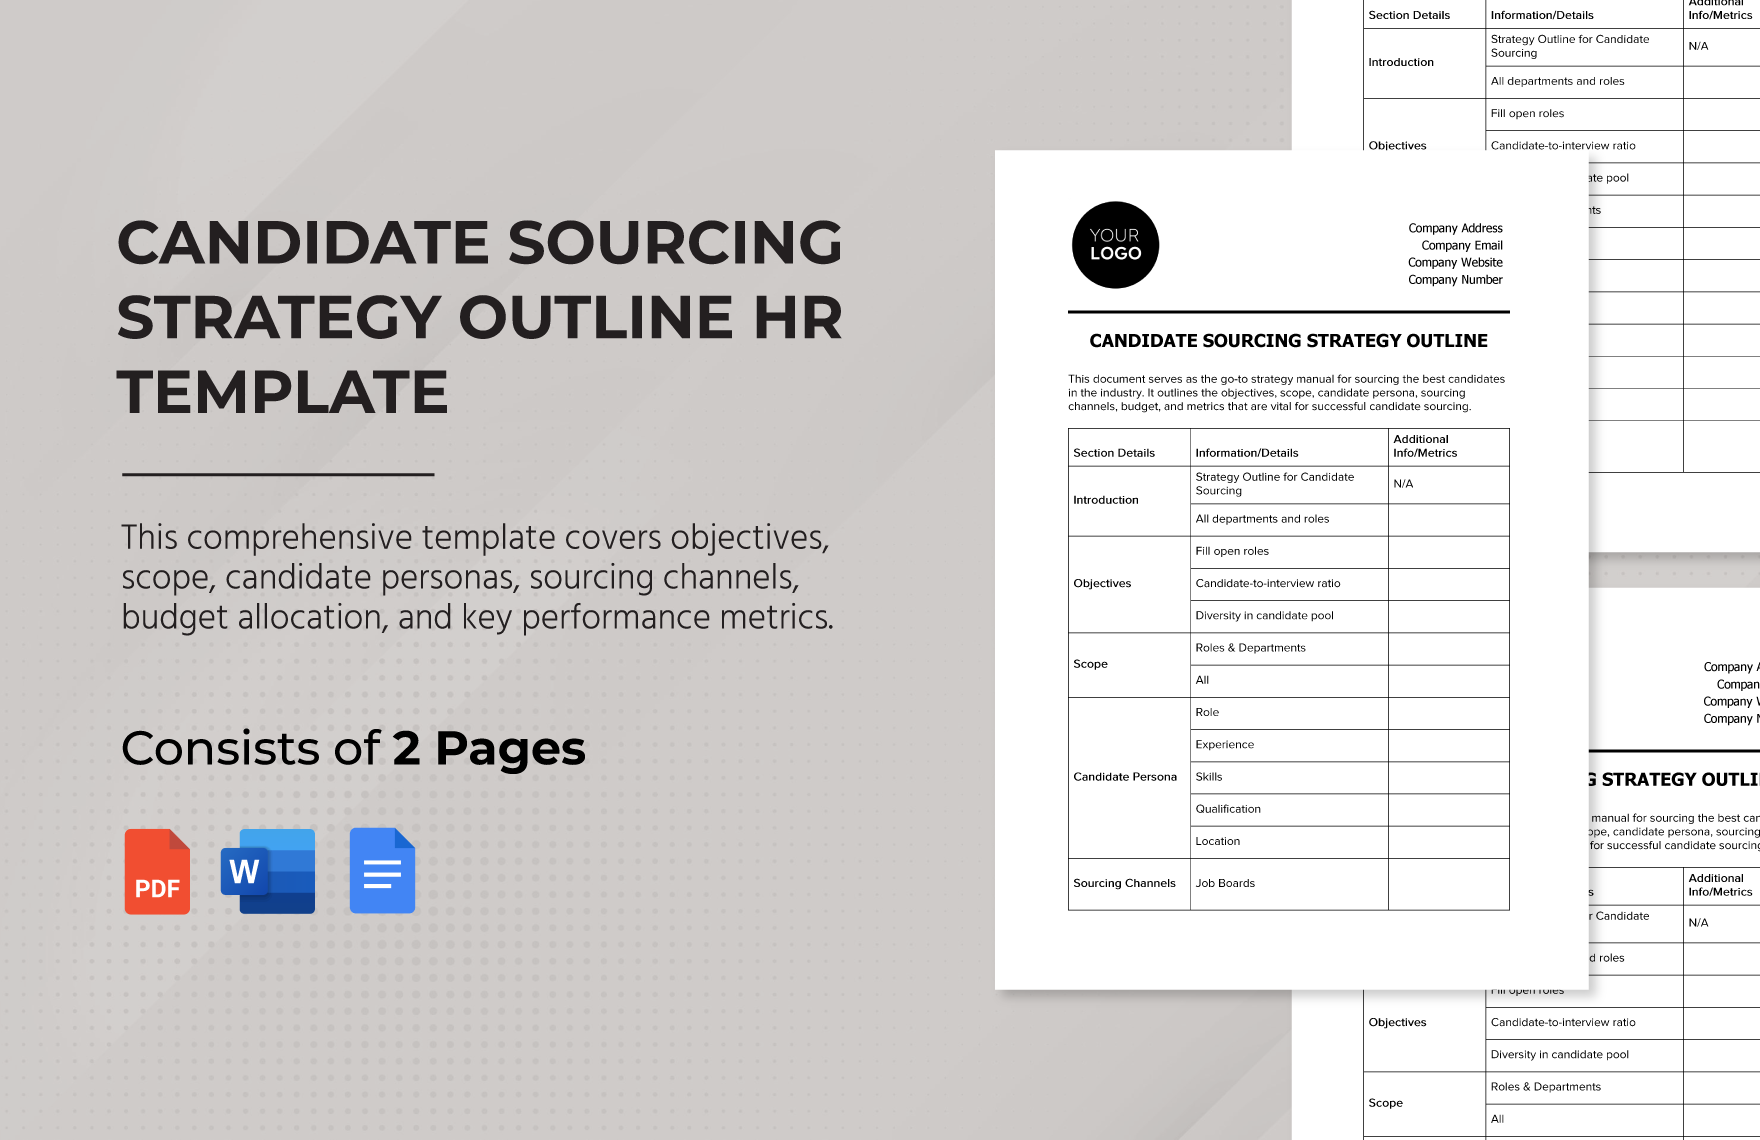 Candidate Sourcing Strategy Outline HR Template